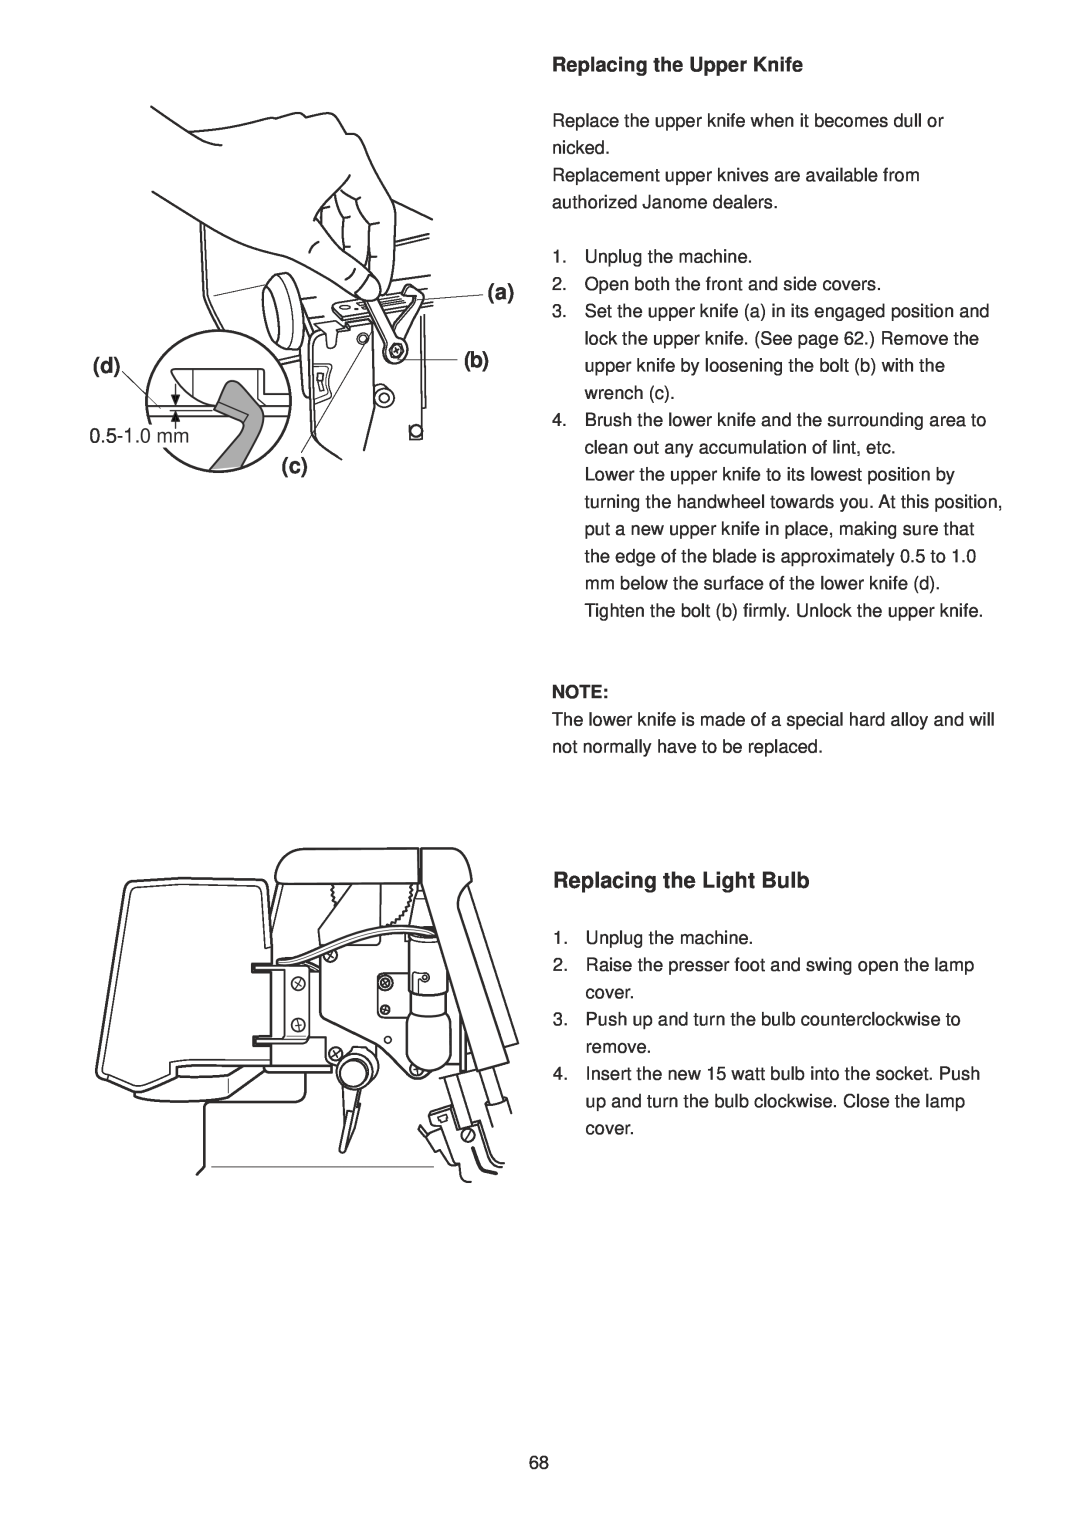 Janome 1100D Professional manual Replacing the Light Bulb, 0.5-1.0 mm, Replacing the Upper Knife 